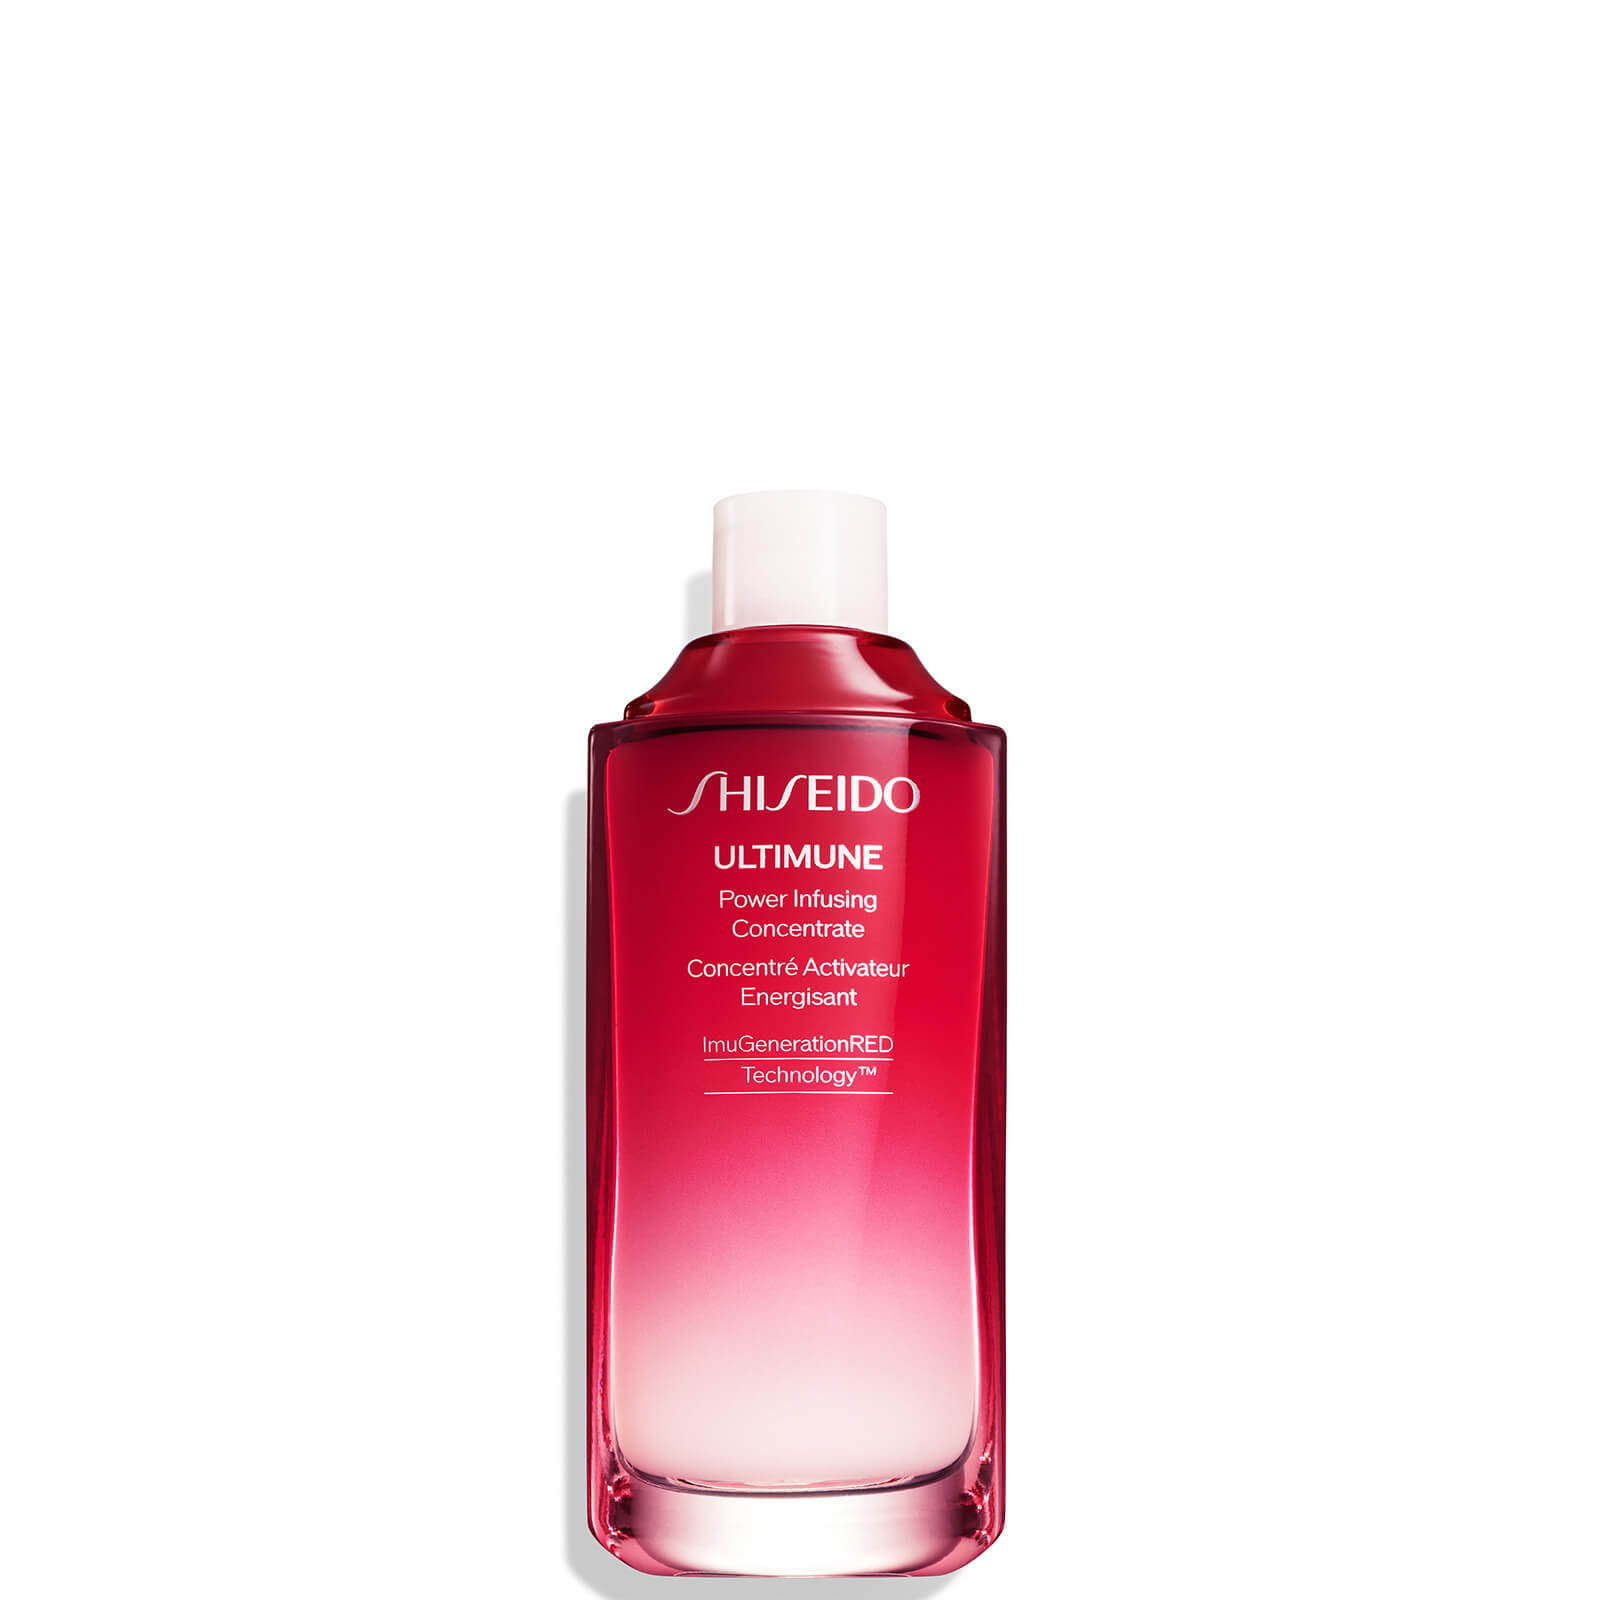 Shiseido Ultimune Power Infusing Concentrate (Various Sizes) - 75ml Refill